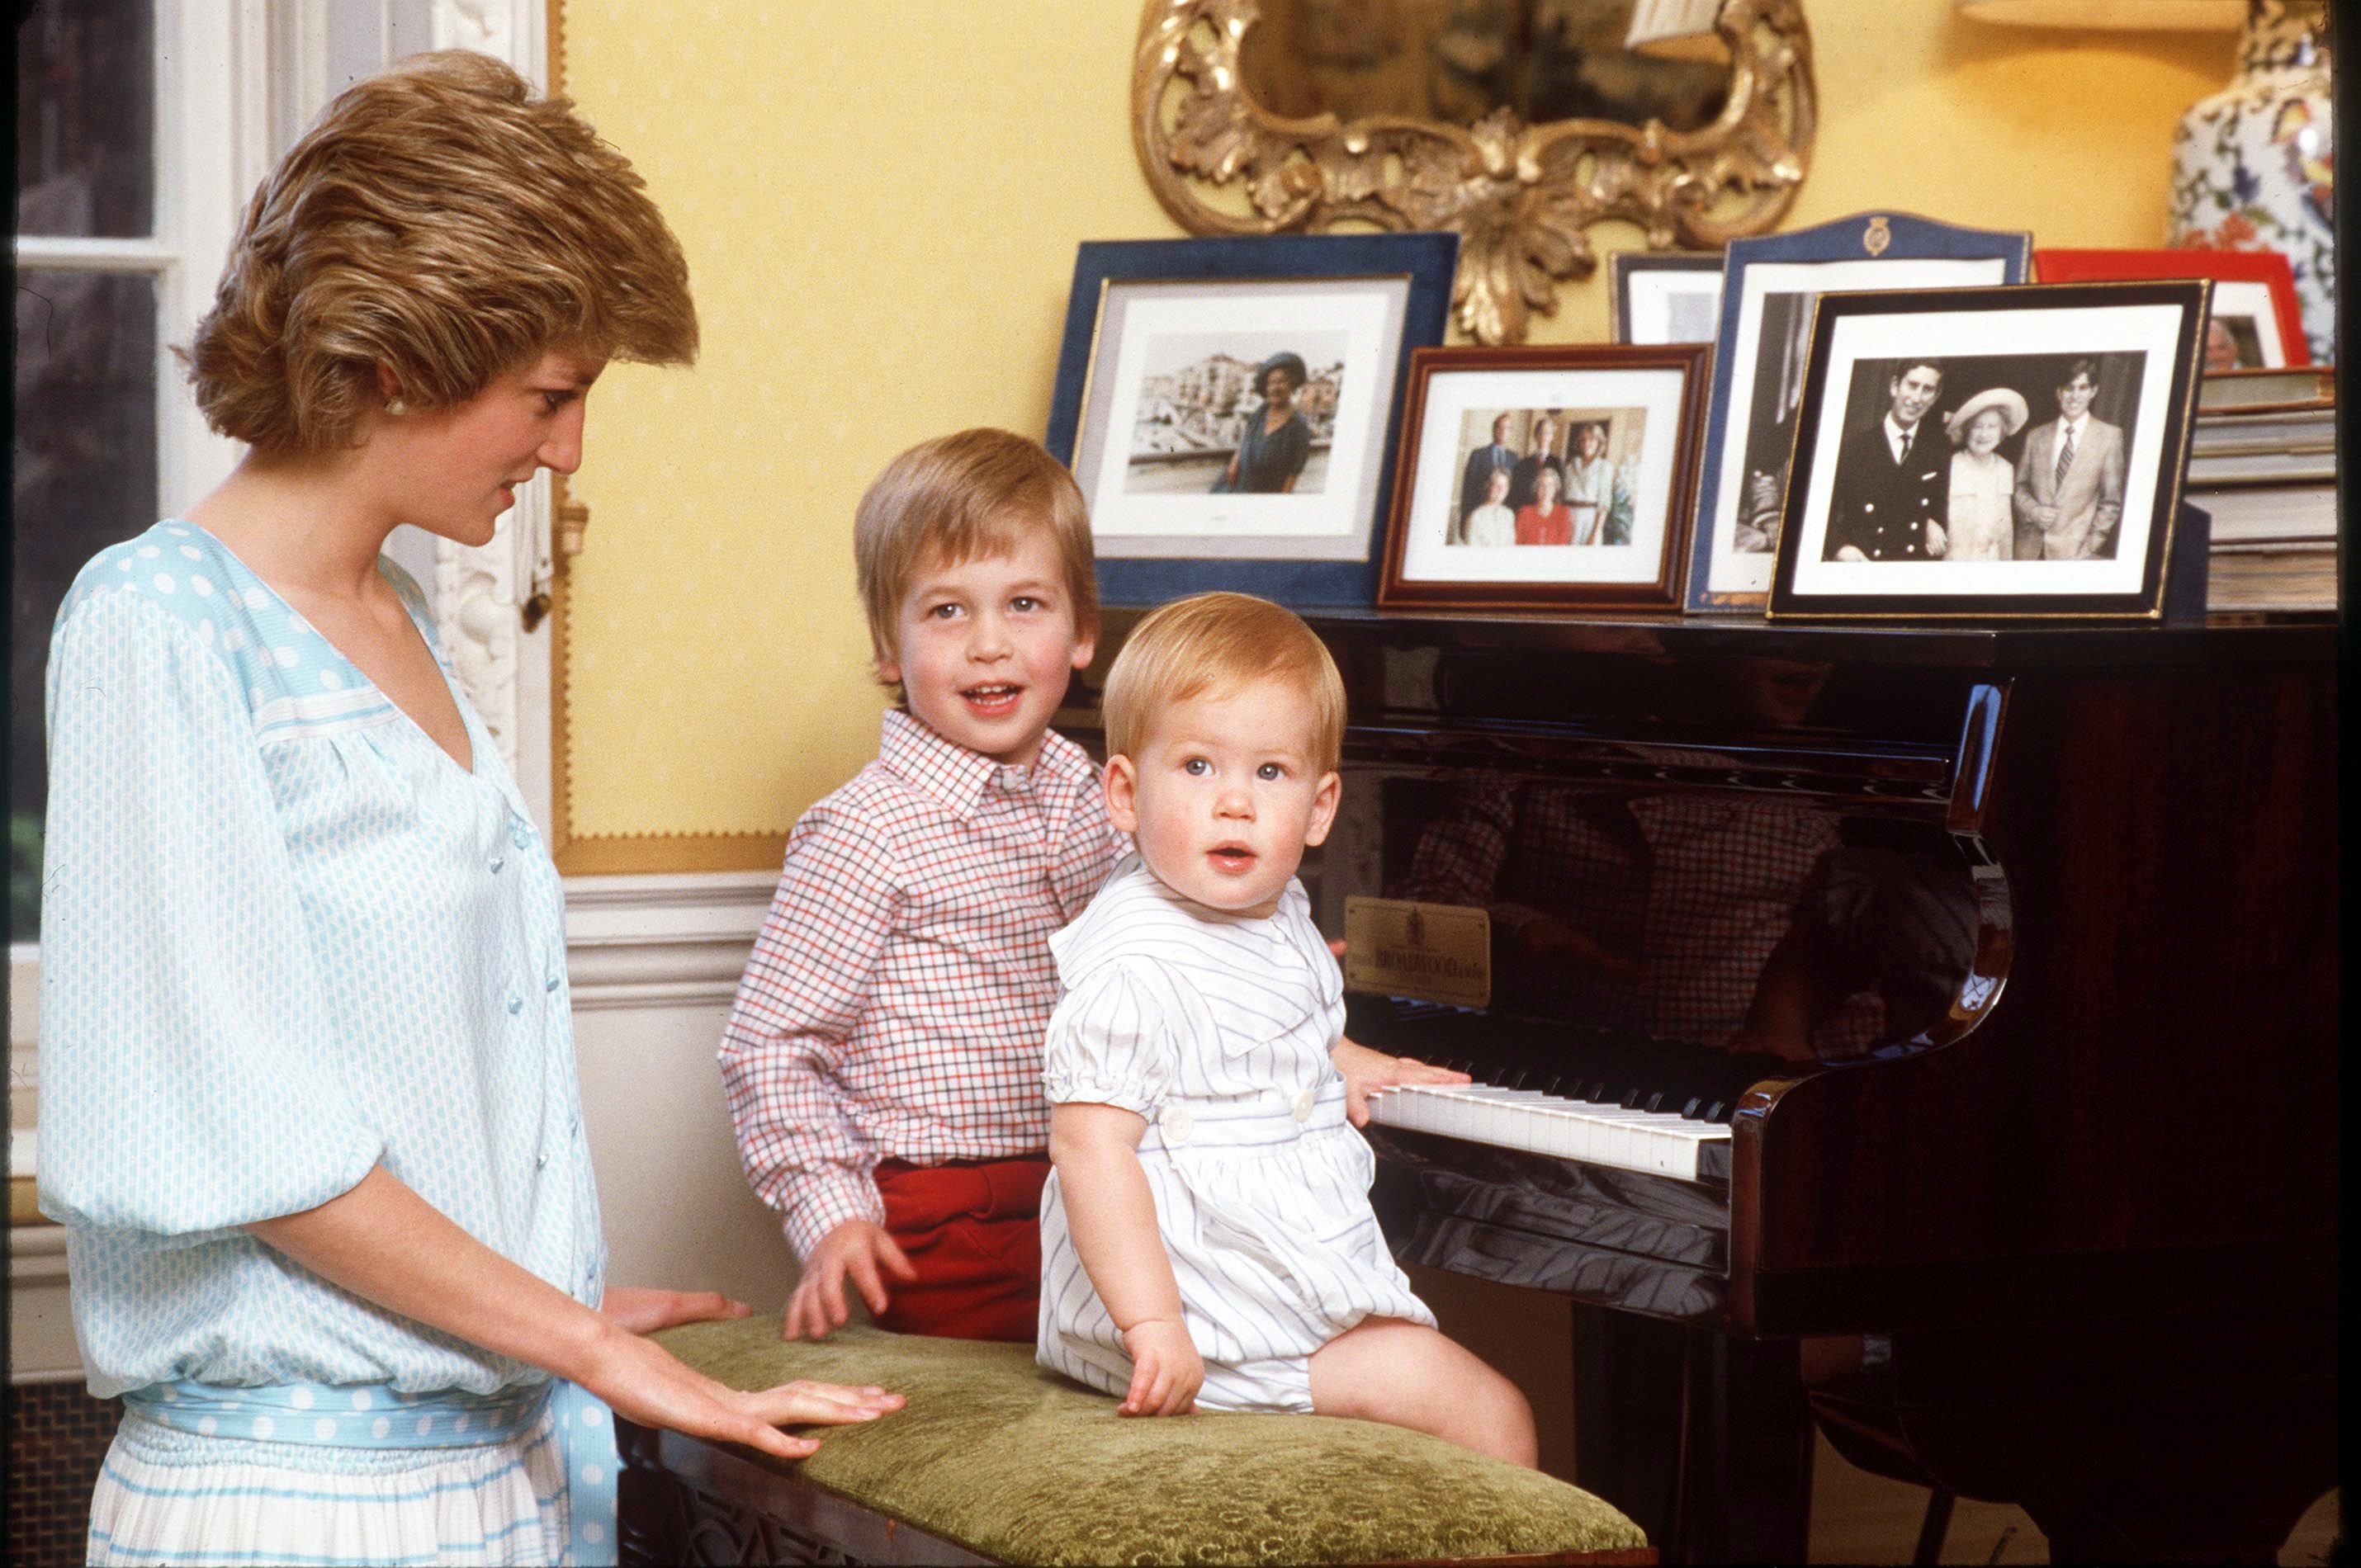 Princess Diana wearing an outfit designed by Dale Tryon's fashion label Kanga with Prince William and Prince Harry at Kensington Palace on October 4, 1985 |  Source: Getty Images 